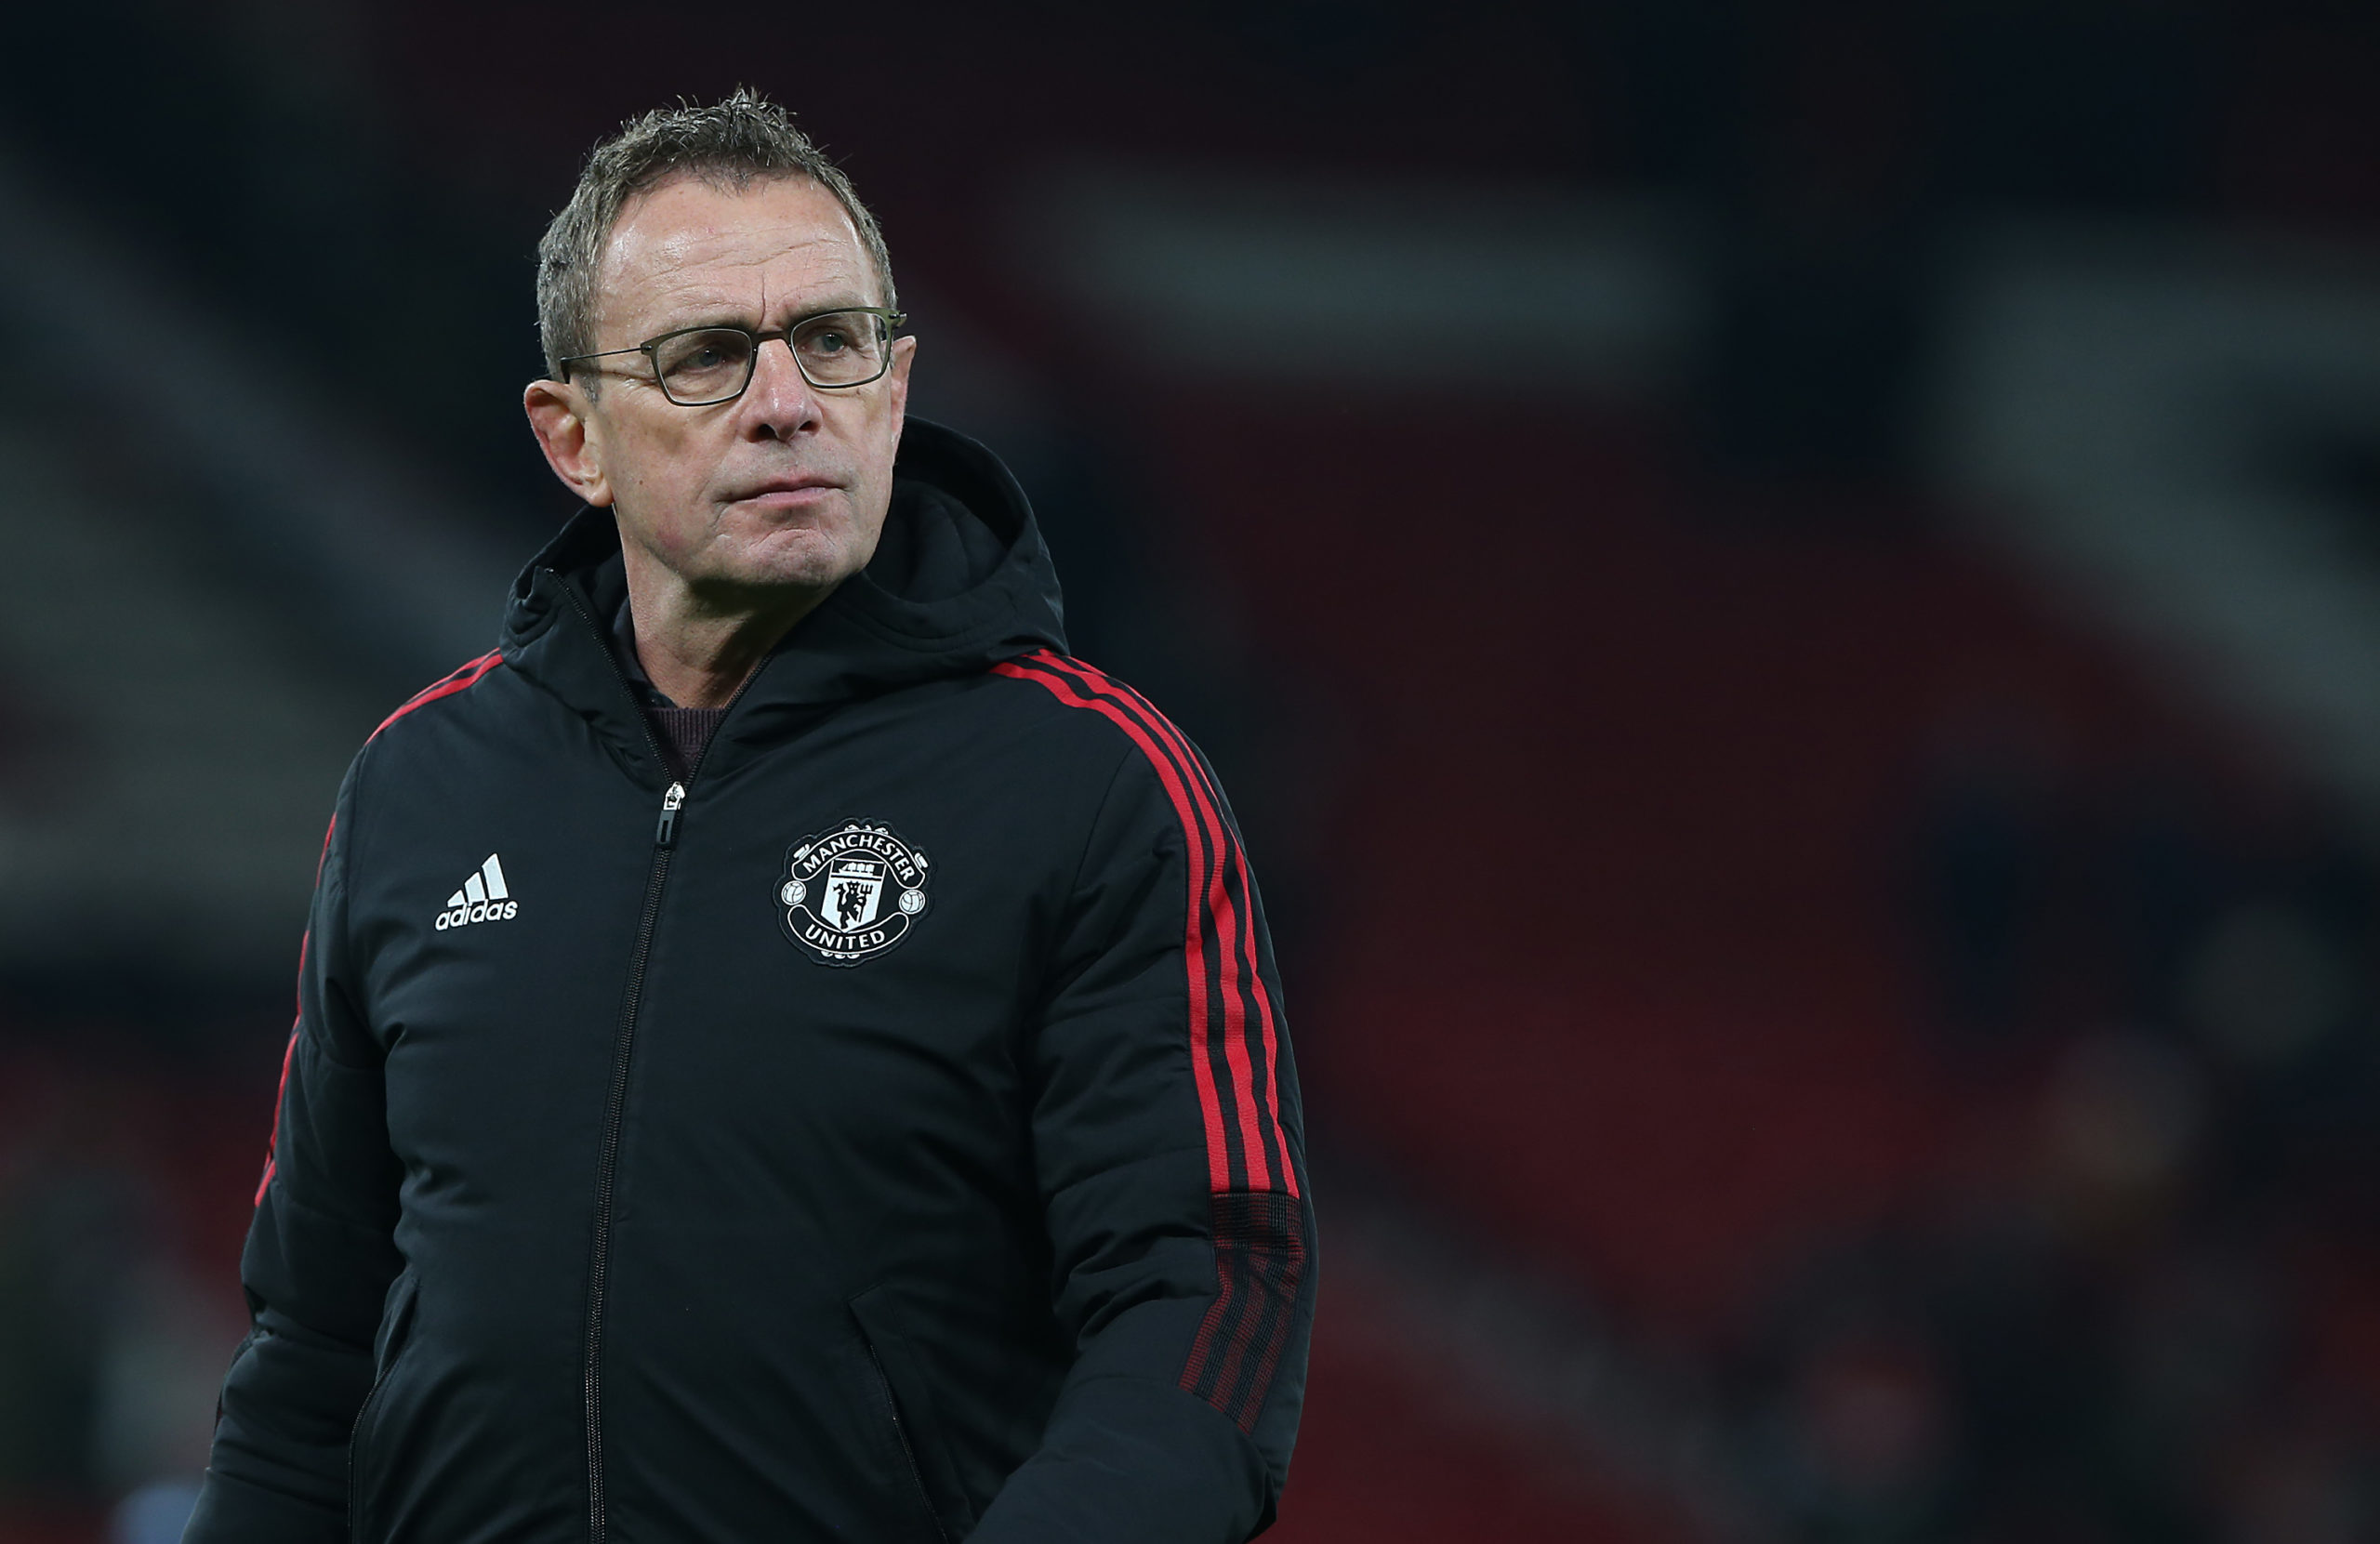 Rangnick simplified instructions to United's players, says report